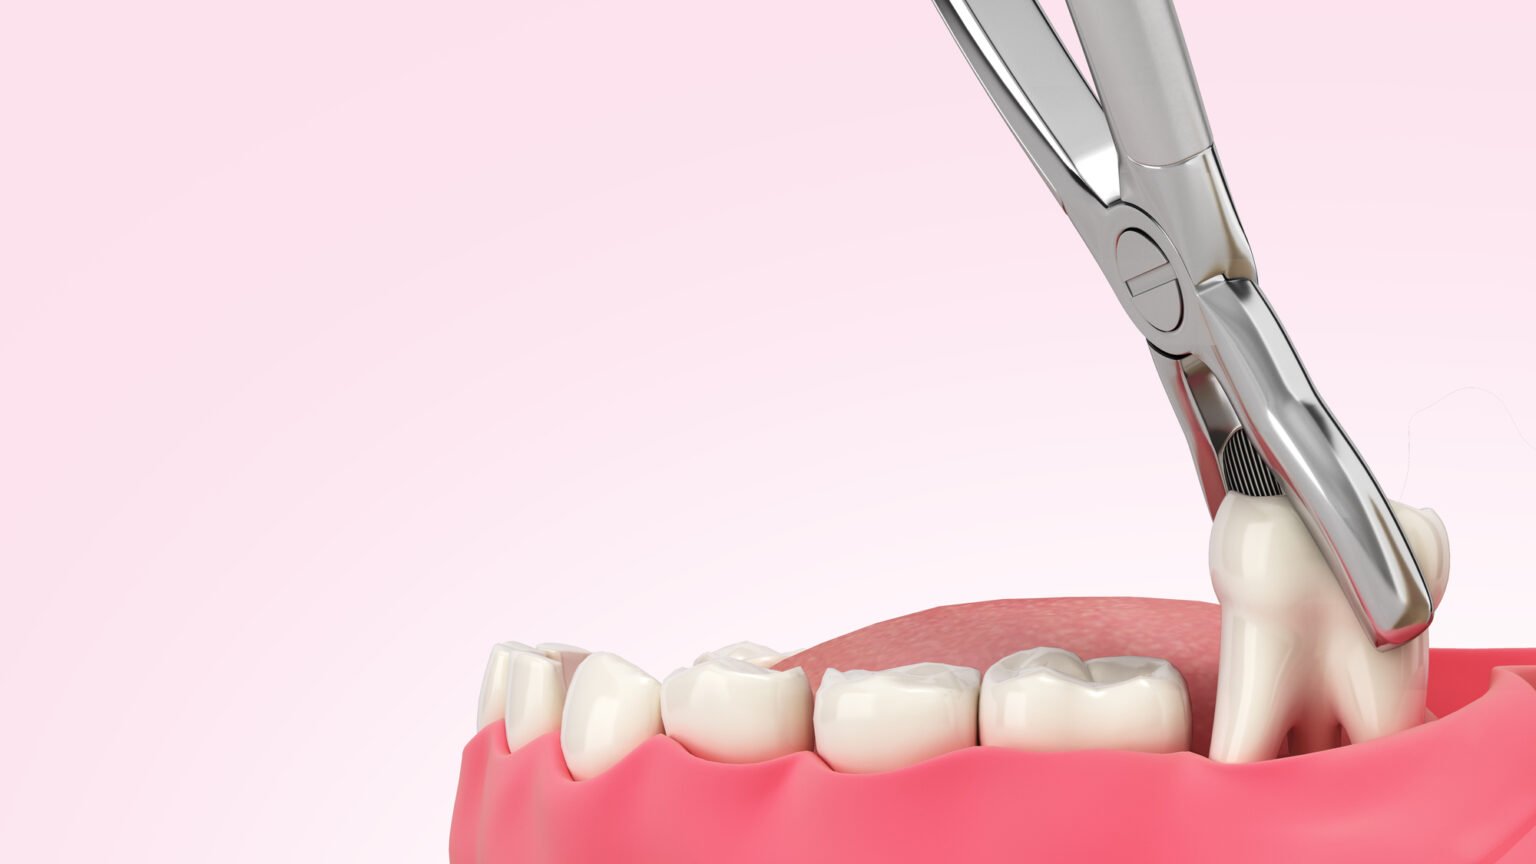 Dental extraction procedure for wisdom teeth removal in Scarborough